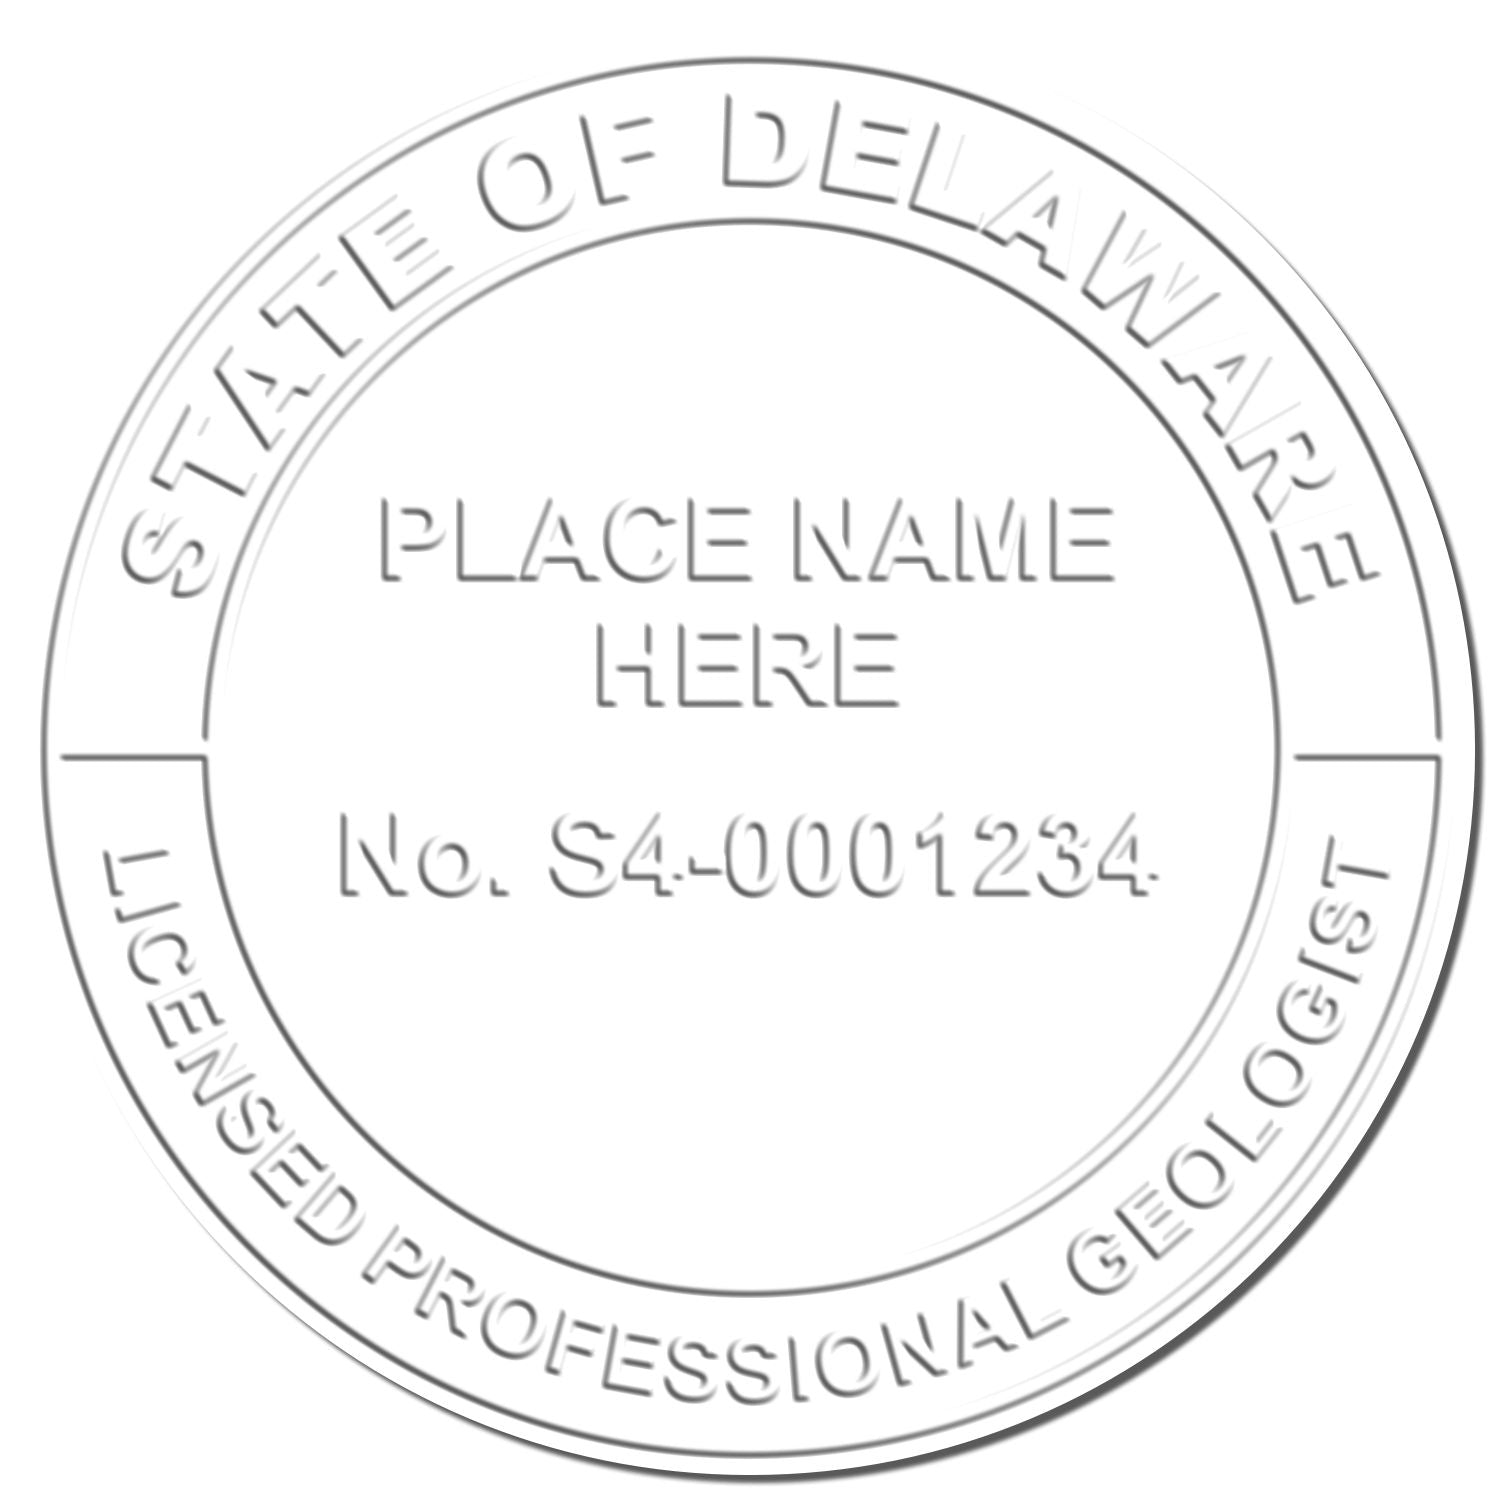 A photograph of the State of Delaware Extended Long Reach Geologist Seal stamp impression reveals a vivid, professional image of the on paper.